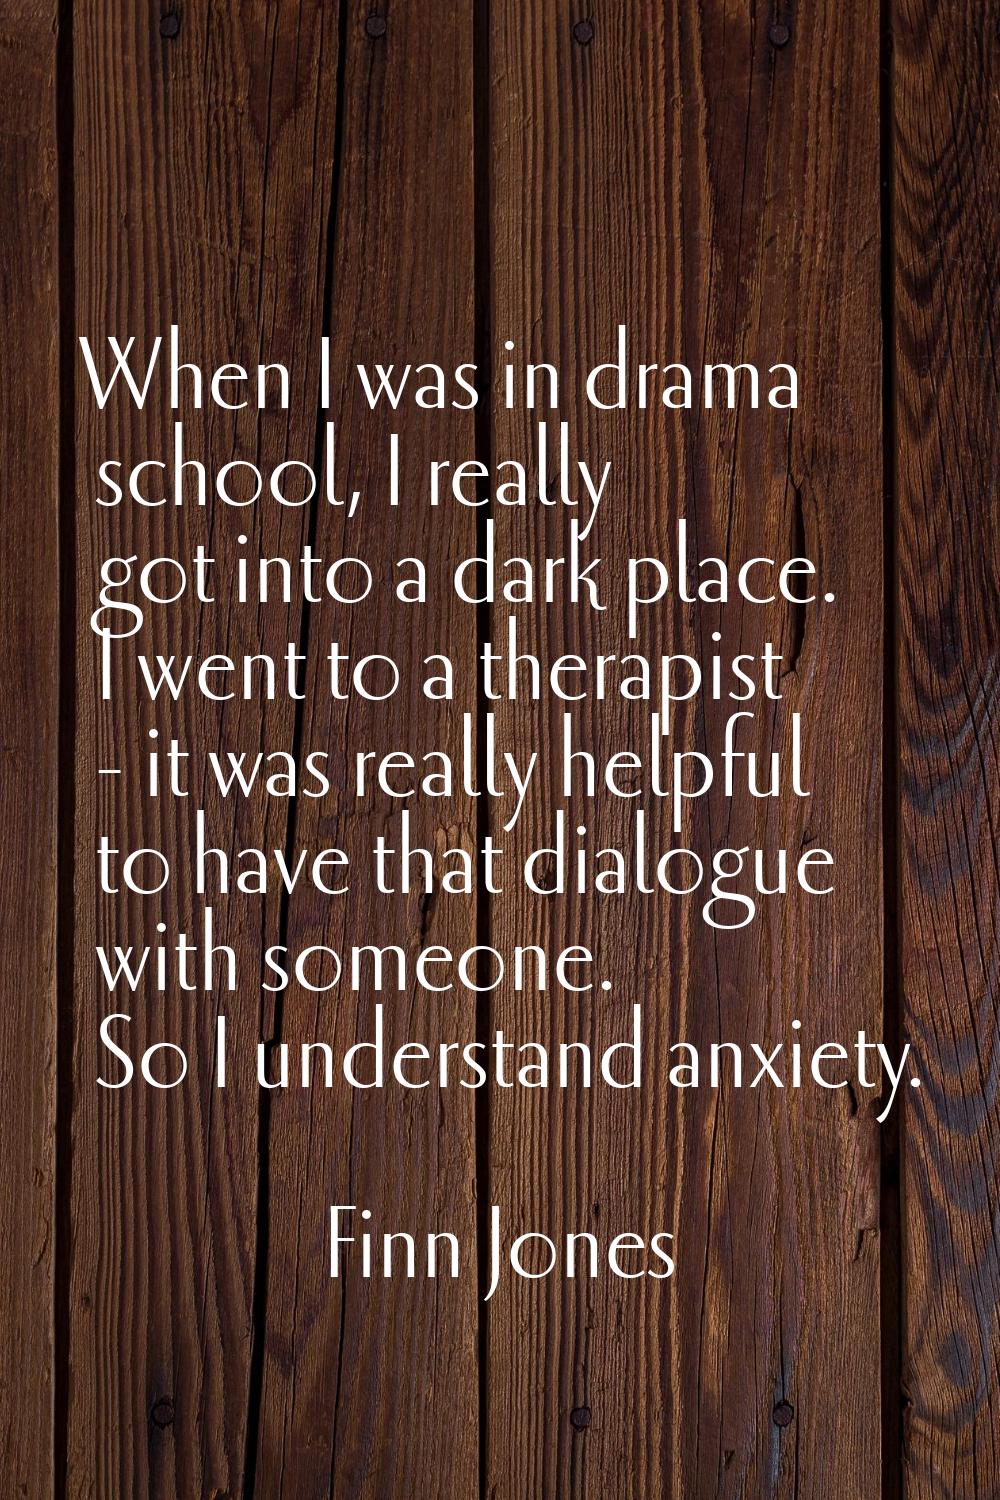 When I was in drama school, I really got into a dark place. I went to a therapist - it was really h